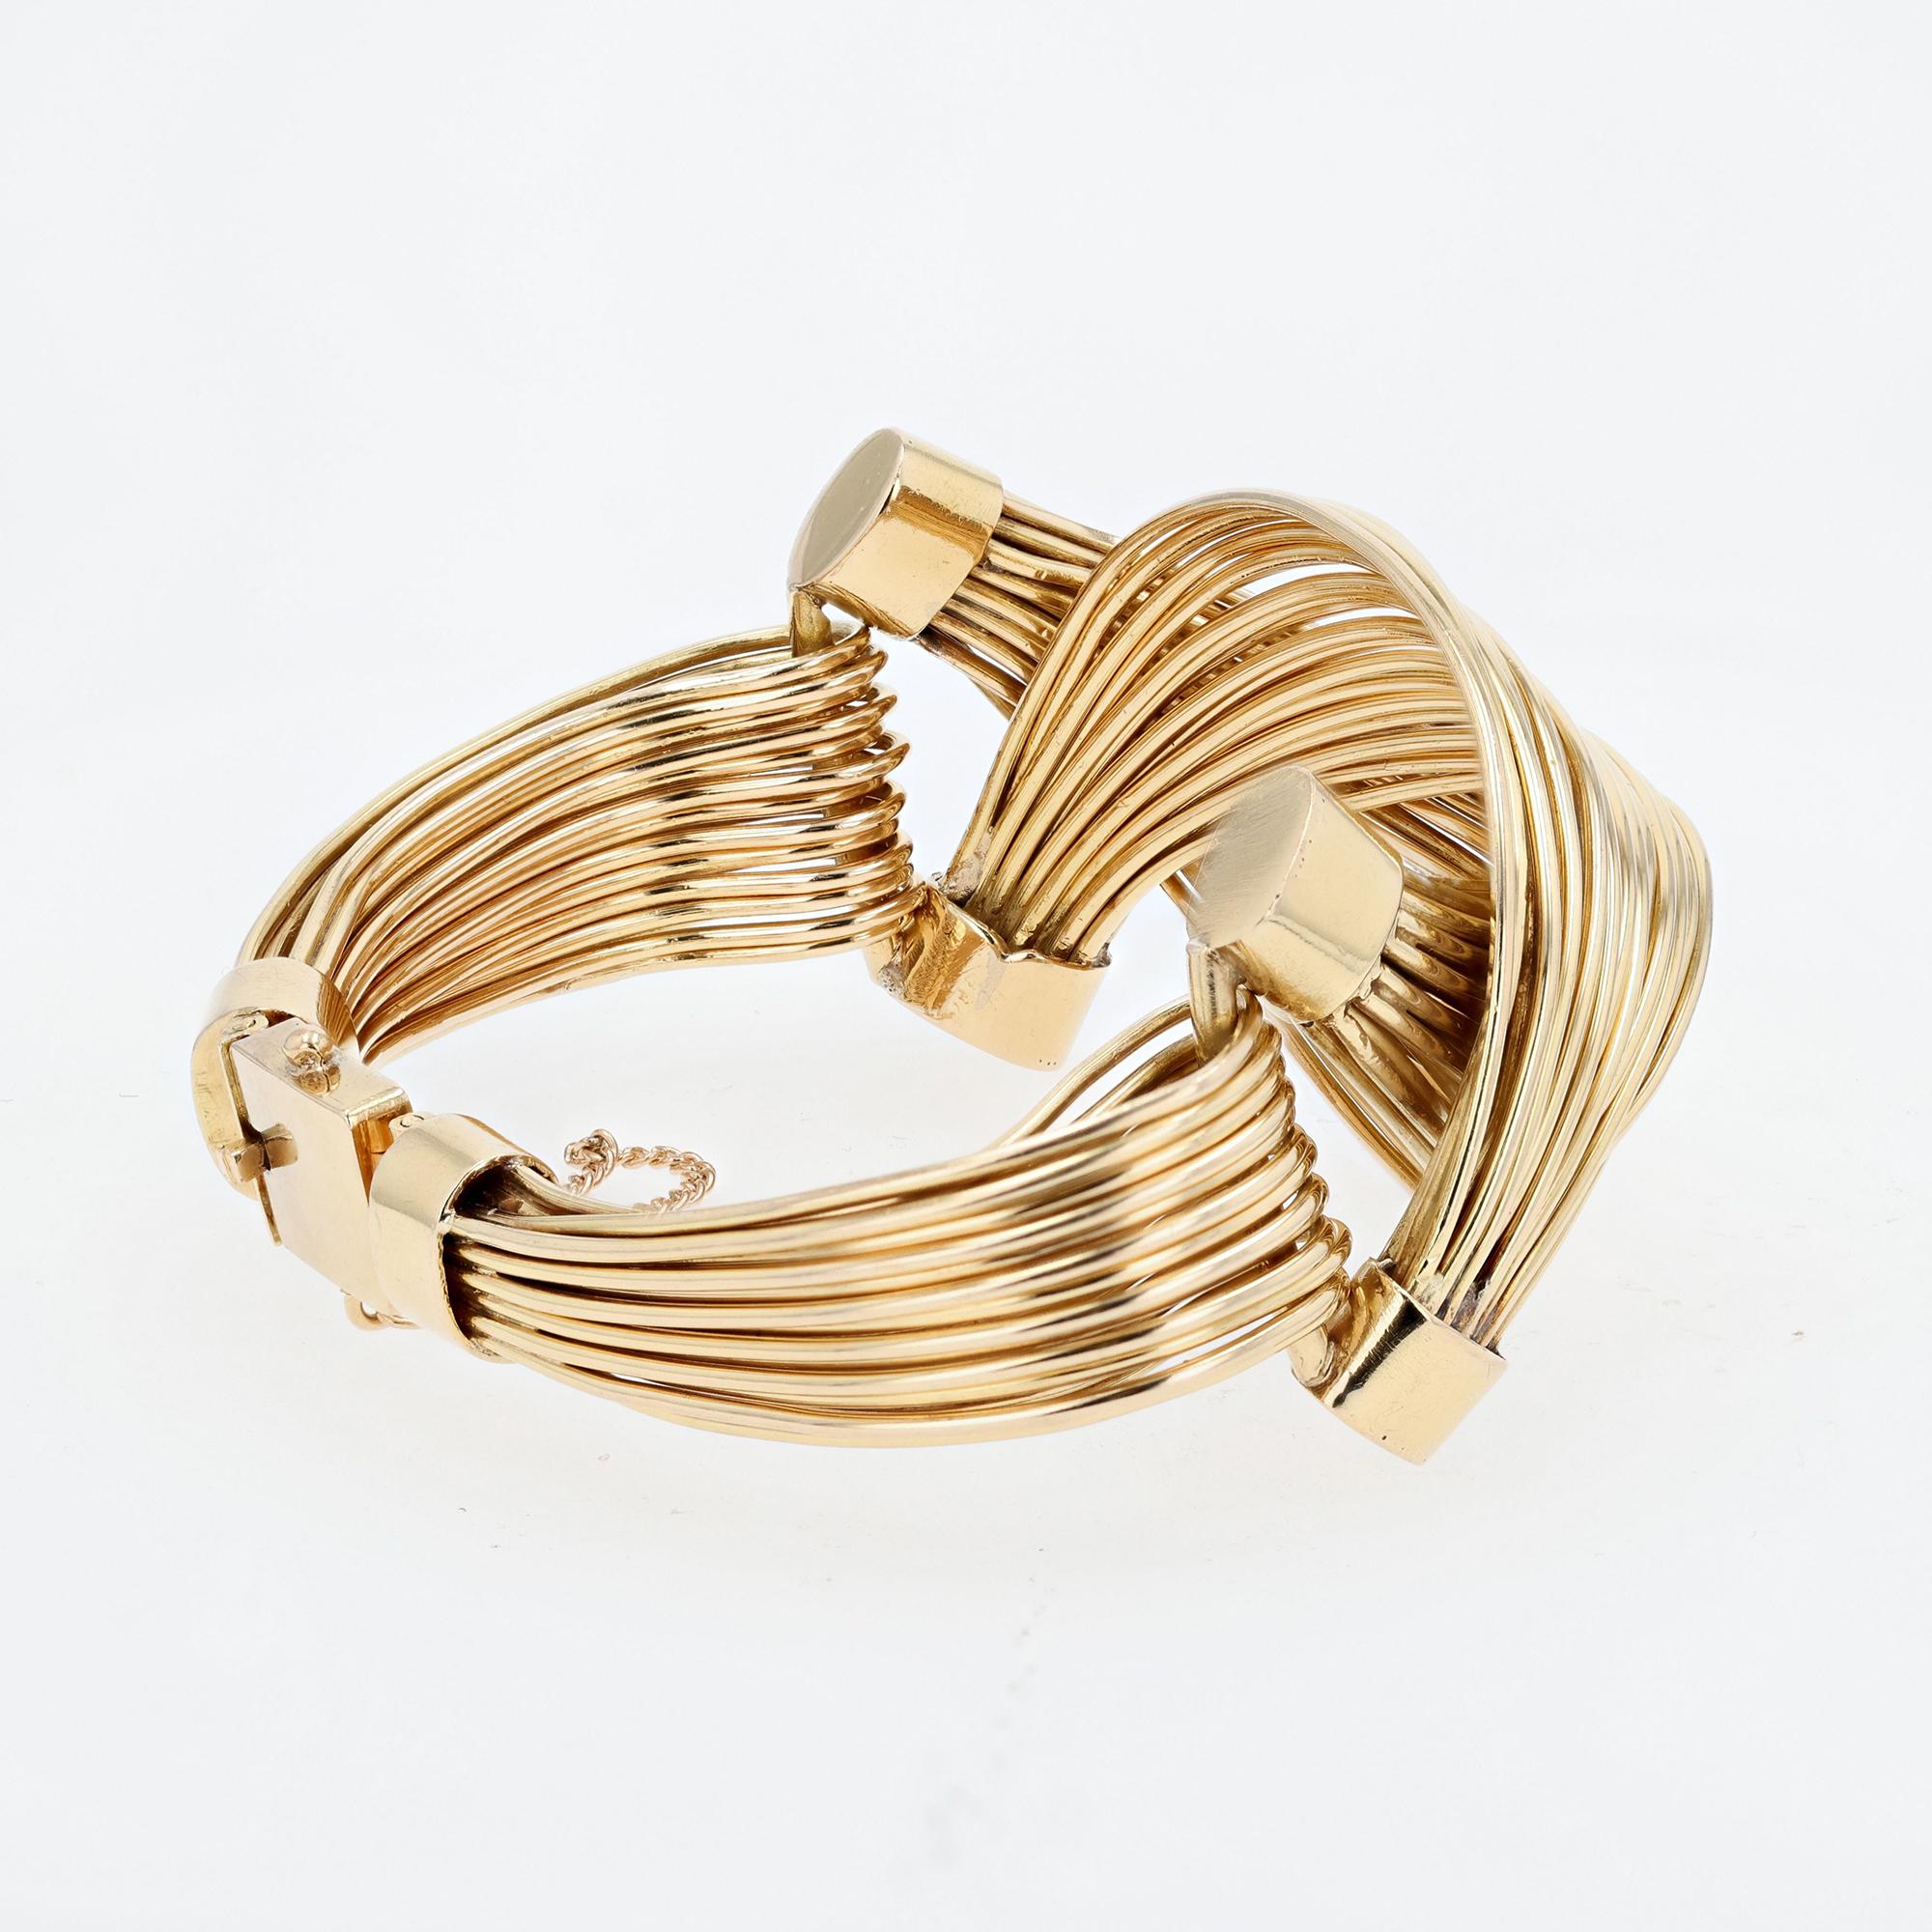 Vintage 18 Yellow Gold Post War (ca 1950s) handmade double hinged sculptural cuff with 18 rows
of 18YG wire wrap bracelet. Locking clasp safety chain.
